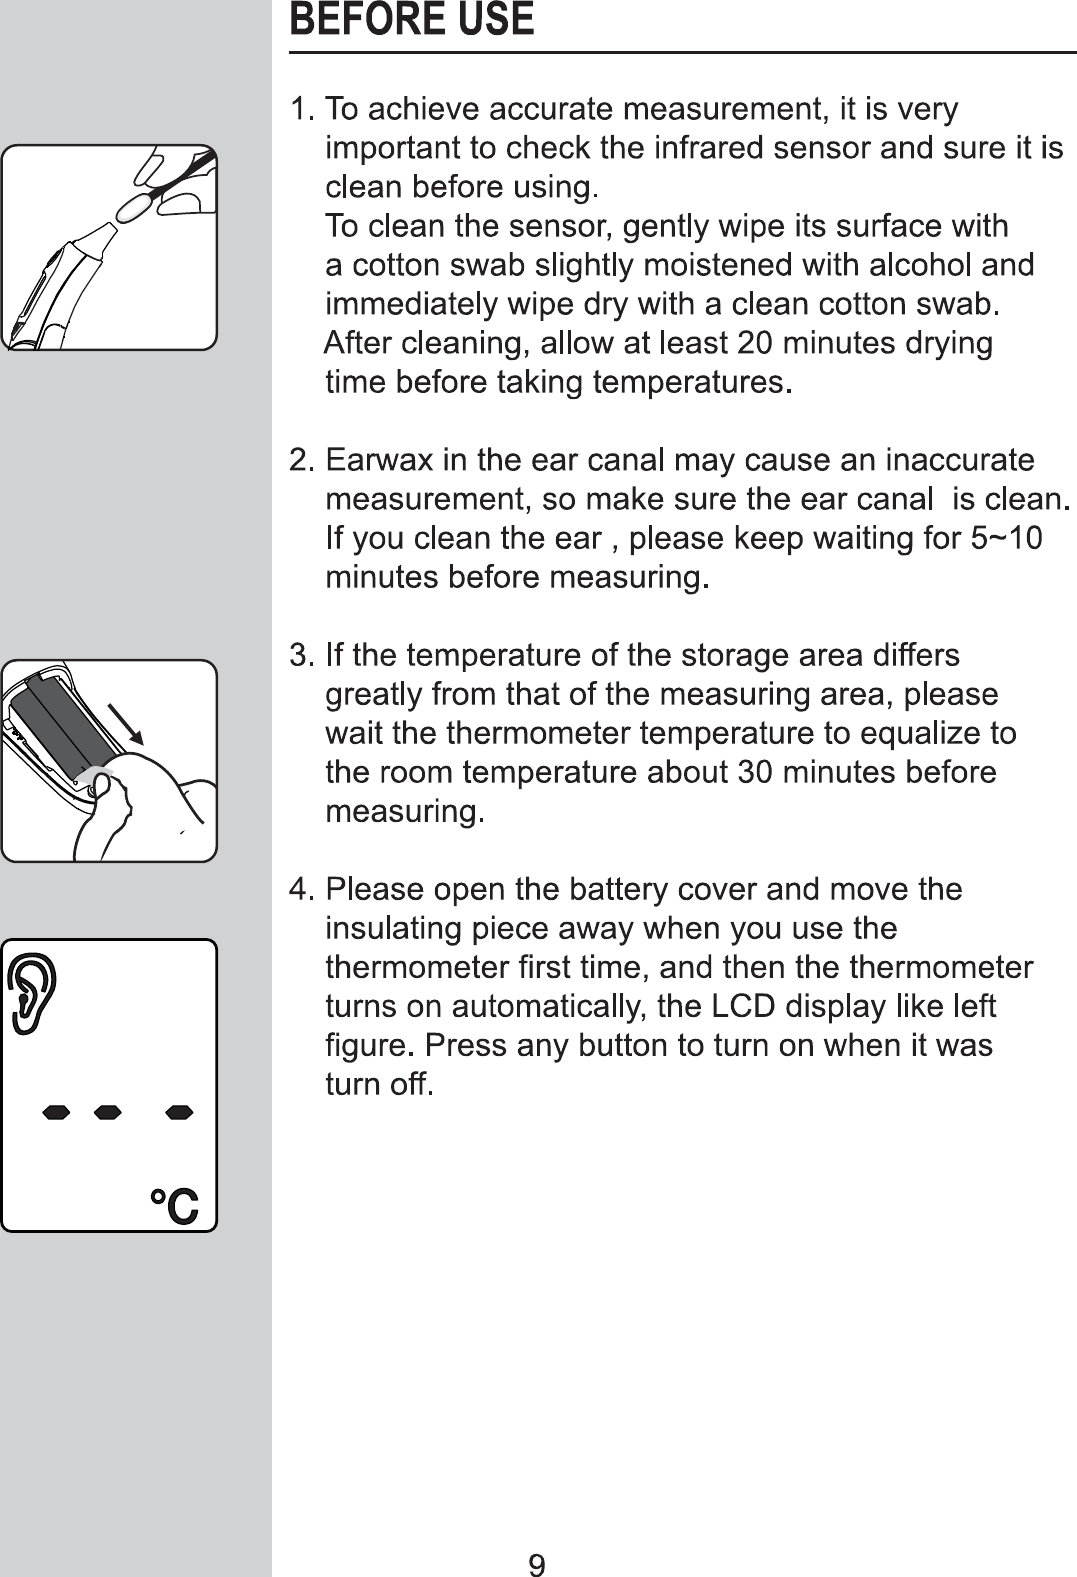 Page 9 of Dongdixin Technology BLUENRG-V10 Digital Ear Thermometer User Manual